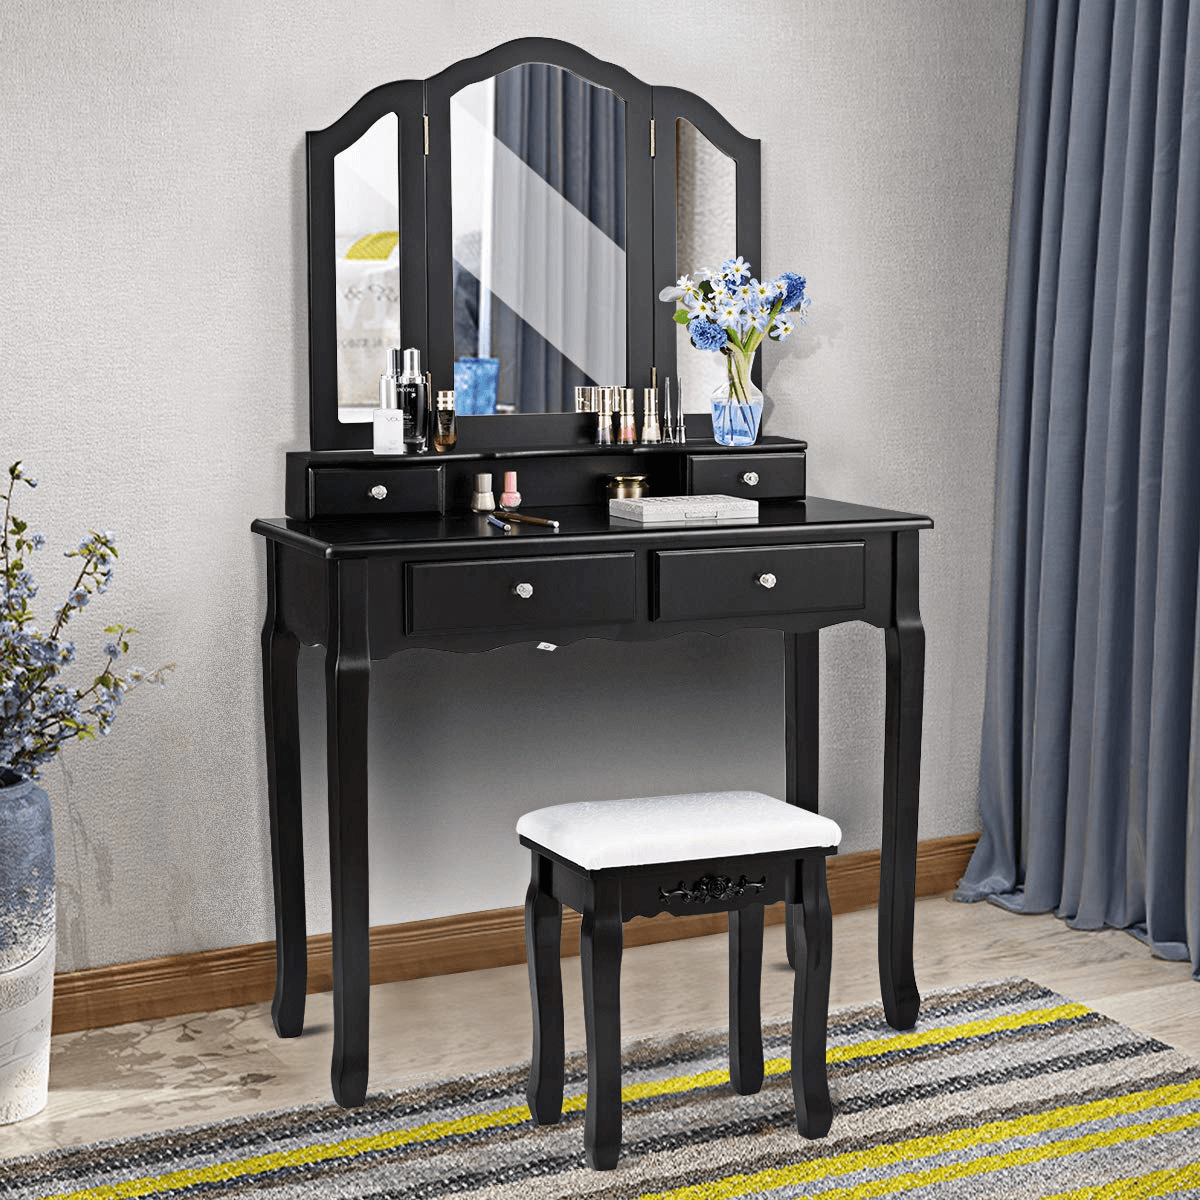 Vanity Set with Tri-Folding Mirror and 4 Drawers Makeup Dressing Table - Giantexus